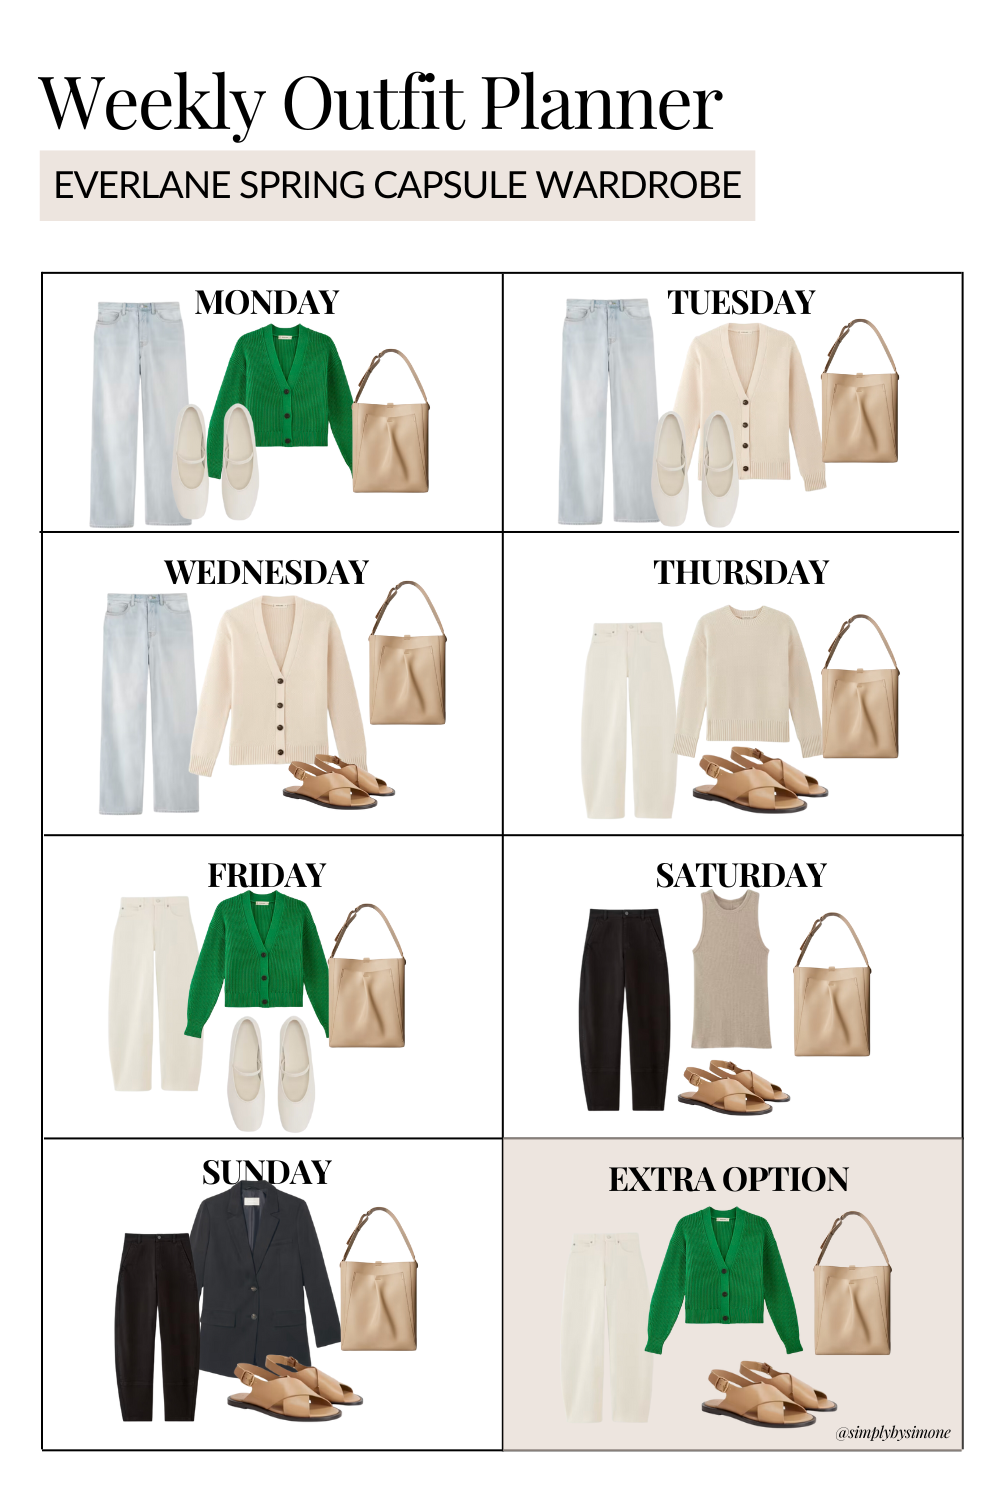 Weekly Outfit Planner Outfits for Monday Through Sunday with all Everlane Items